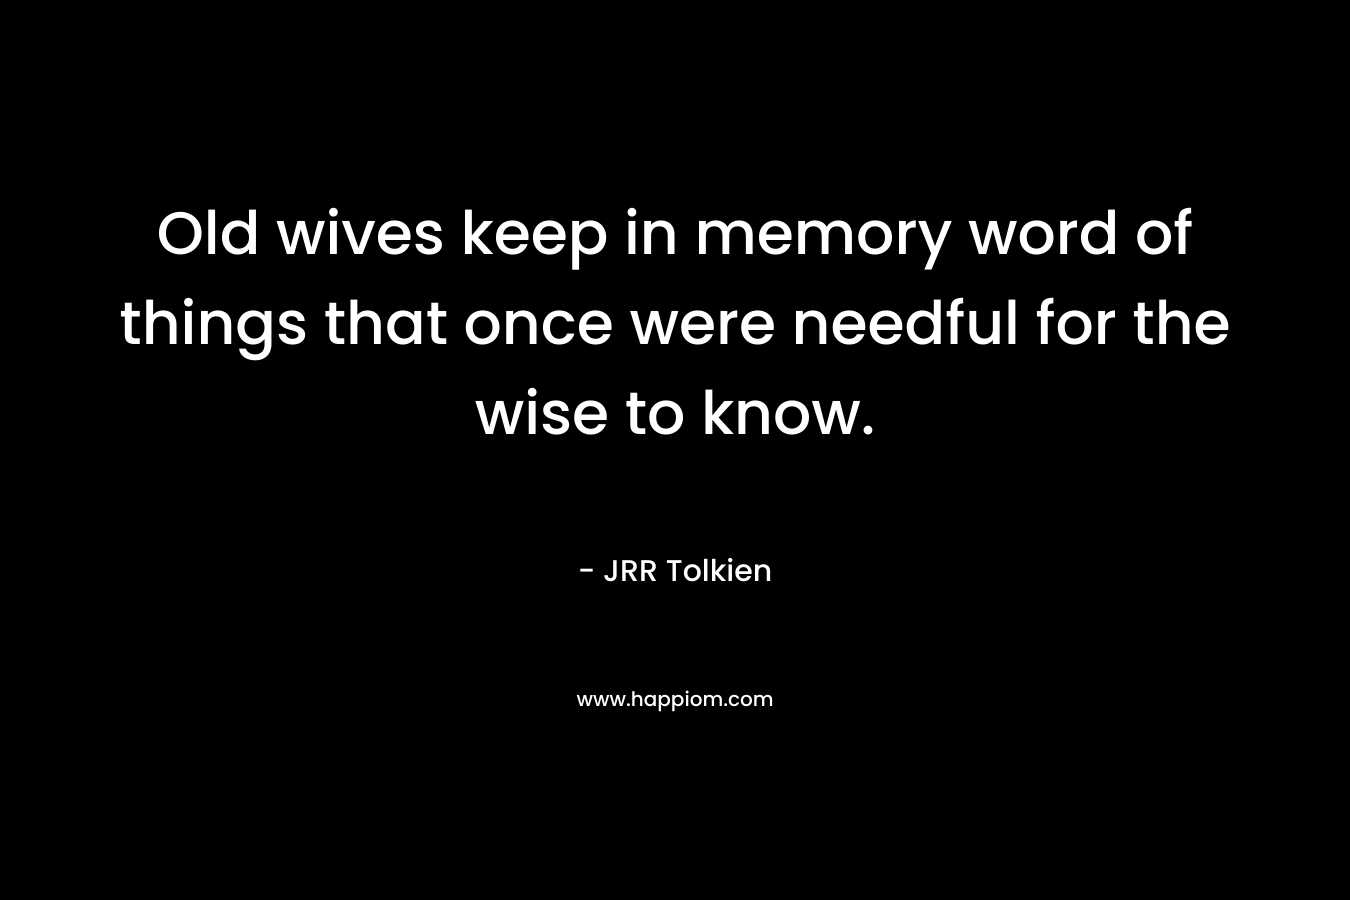 Old wives keep in memory word of things that once were needful for the wise to know.